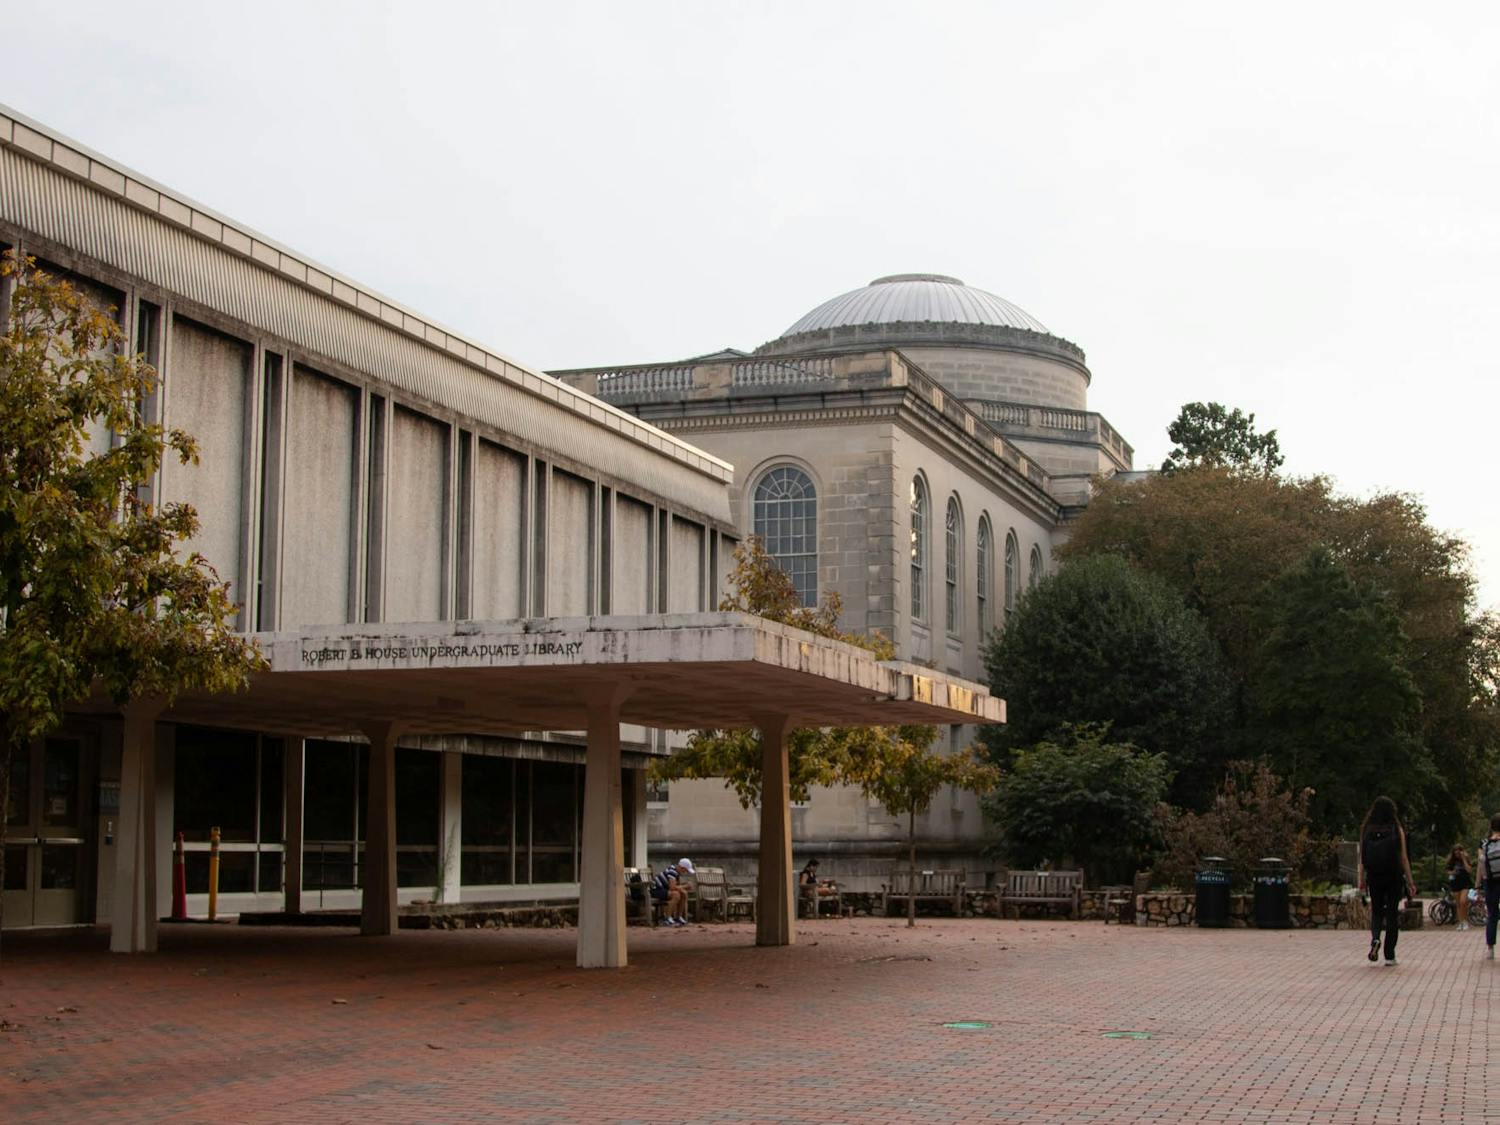 It was announced last week that UNC Libraries will undergo a $2 million budget cut over the next fiscal year that is expected to reduce the libraries’ purchases and subscriptions to academic journals.